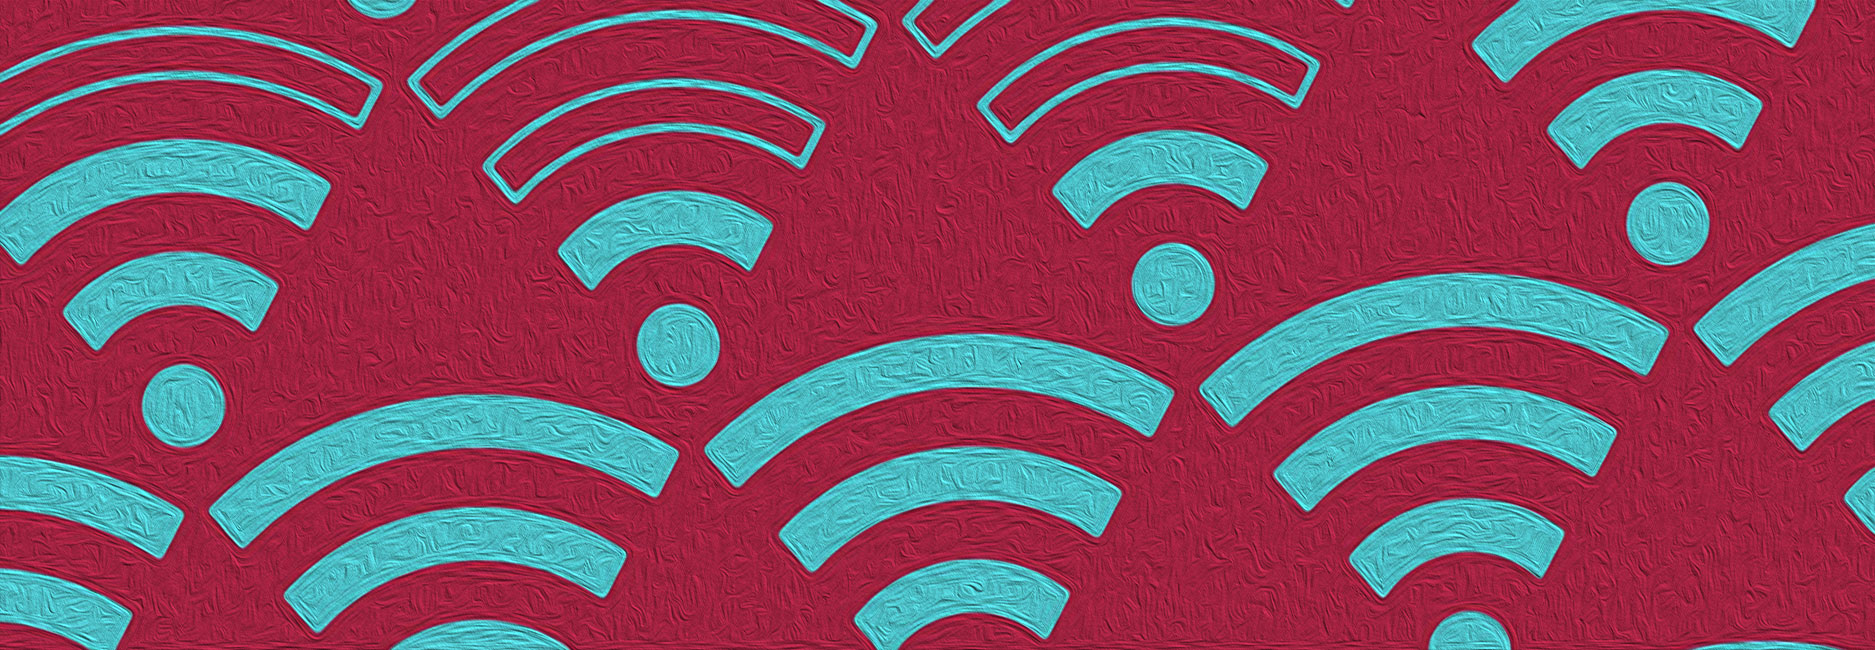 How To: Check If Someone Is Using Your Wi-Fi